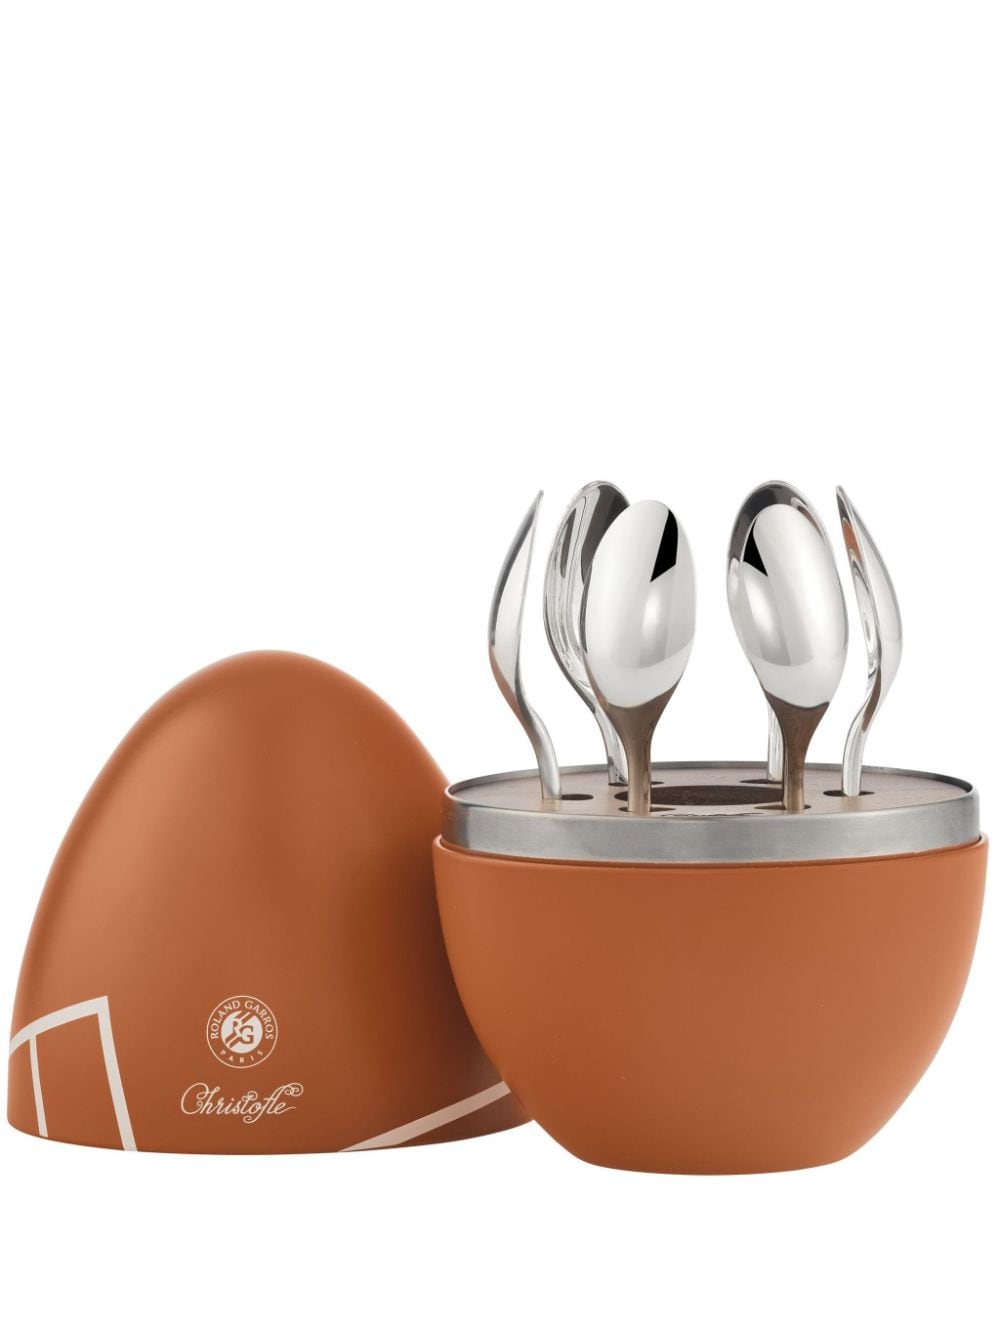 Christofle Mood Coffee Roland-garros Espresso Spoon Set With Chest (6-person Setting) In Silver